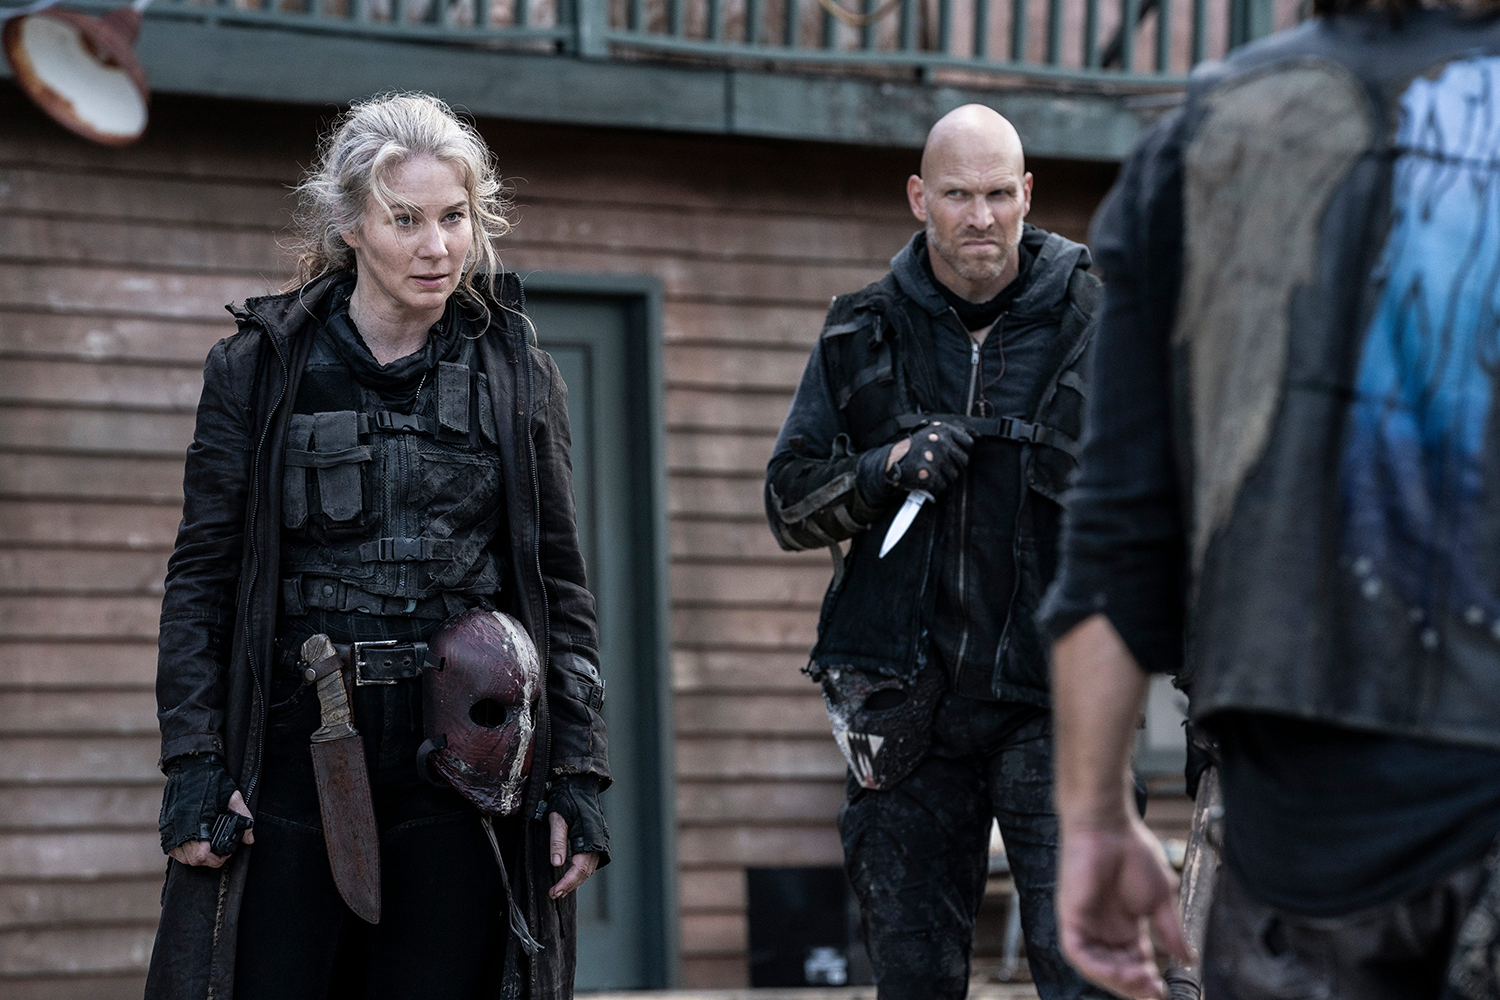 The Walking Dead Basically Buried Its Most Promising Villains Alive - image 2